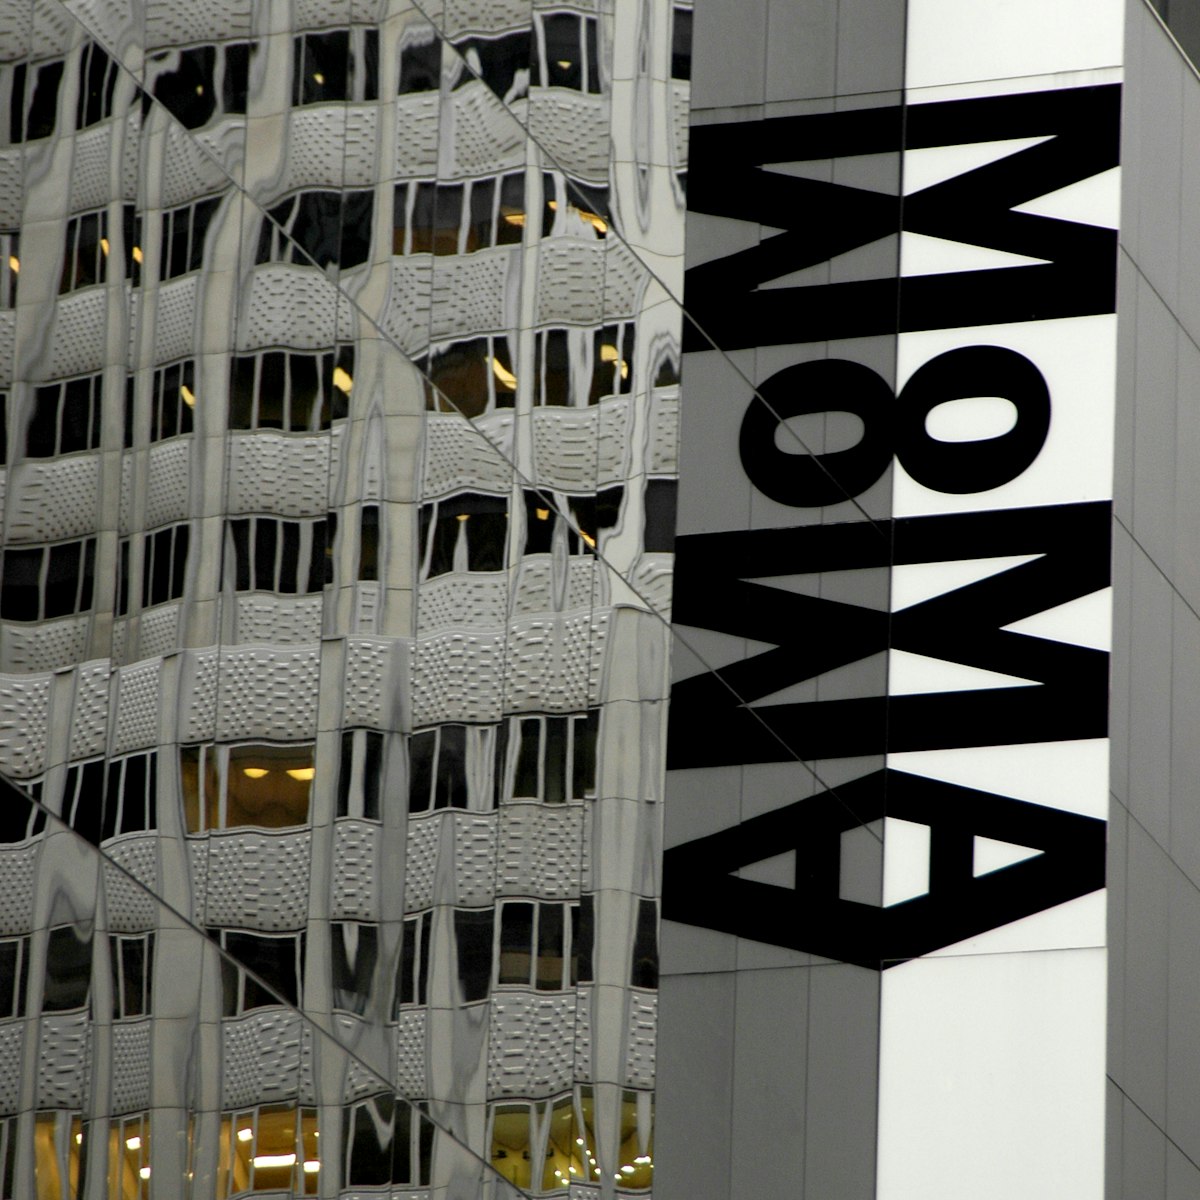 NEW YORK, NY - AUGUST 15 2005: The Museum of Modern Art on August 15, 2005  in New York City. MOMA is an art museum in Midtown Manhattan. (Photo by Athanasios Gioumpasis/Getty Images)